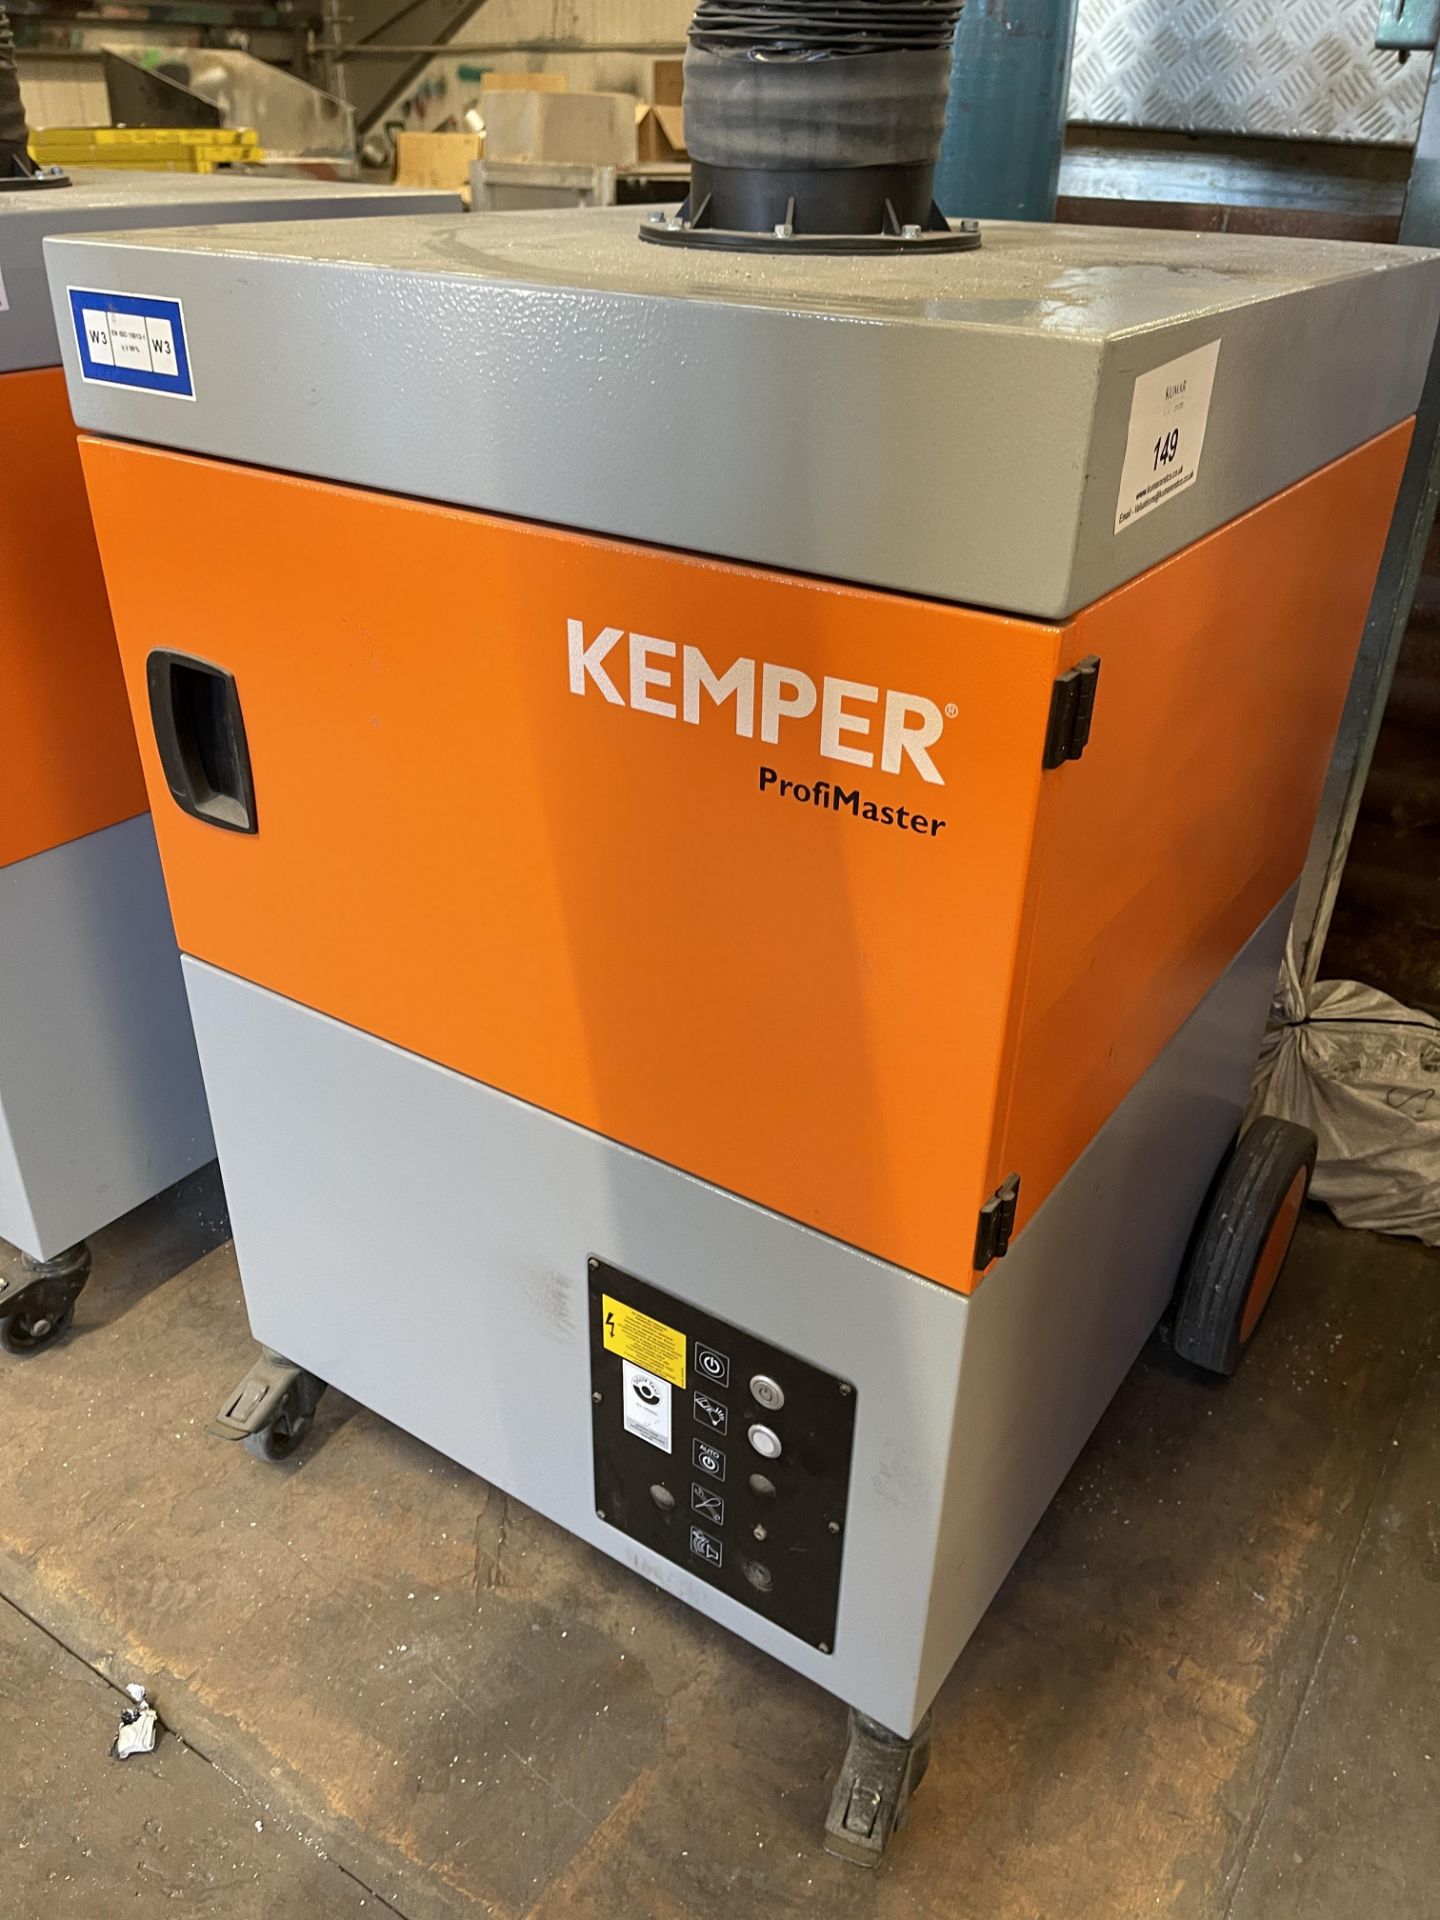 Kemper ProfiMaster Type 60650 Mobile Compact Fume Extraction Unit, Weight 95Kg, Serial No.210200849, - Image 4 of 6